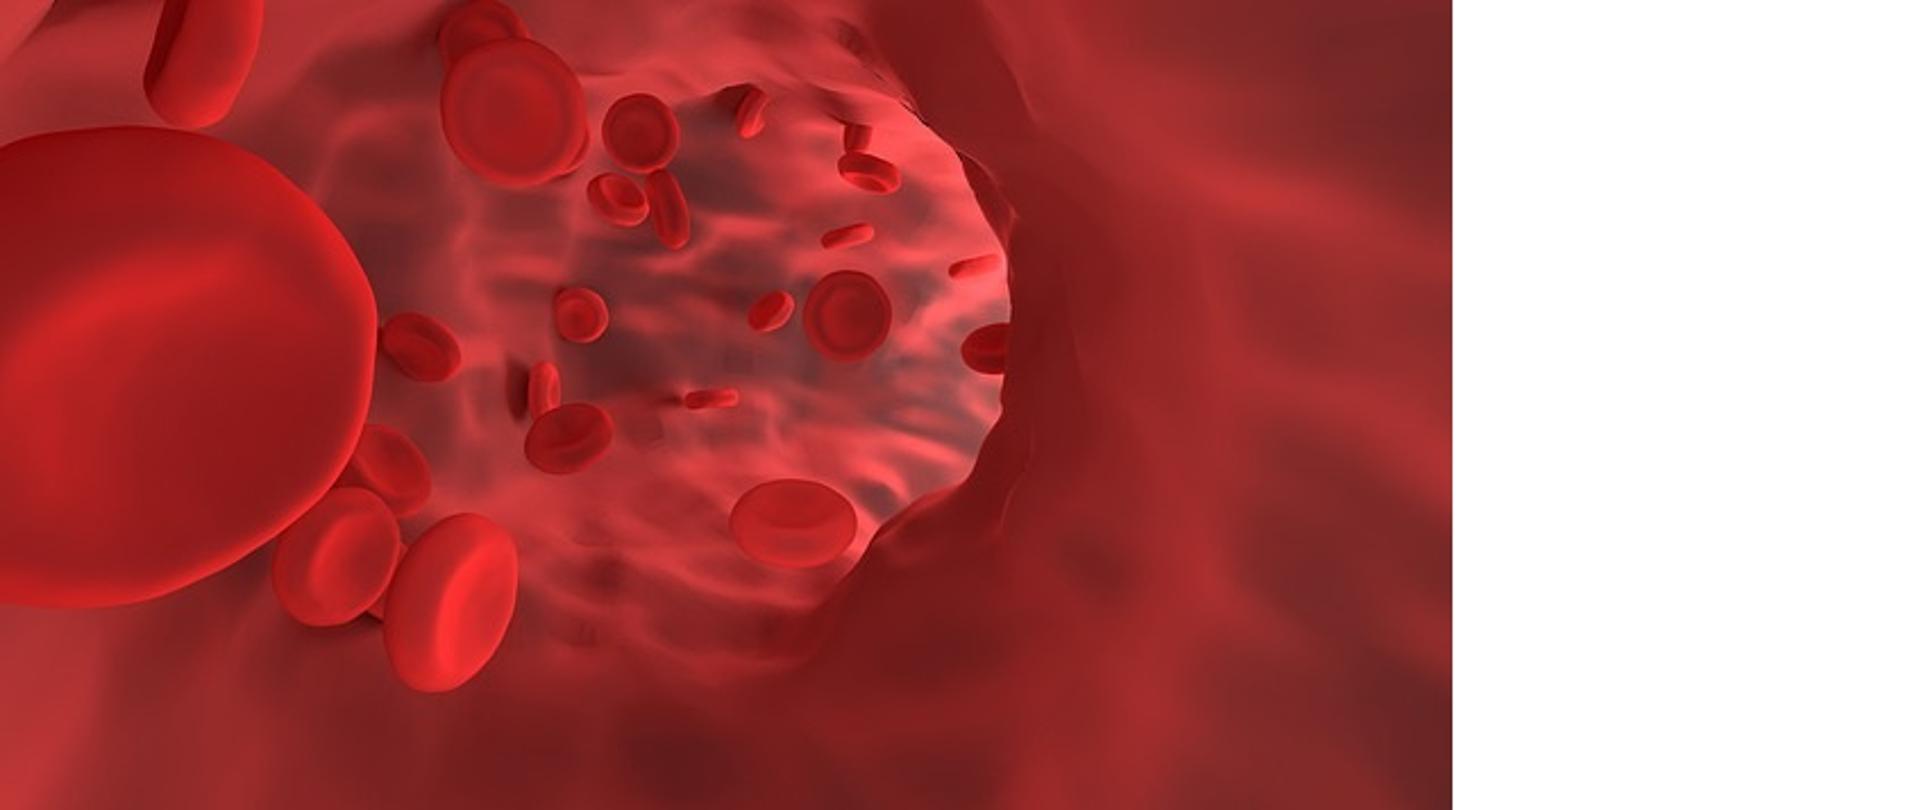 red-blood-cell-g4b358e2bb_640